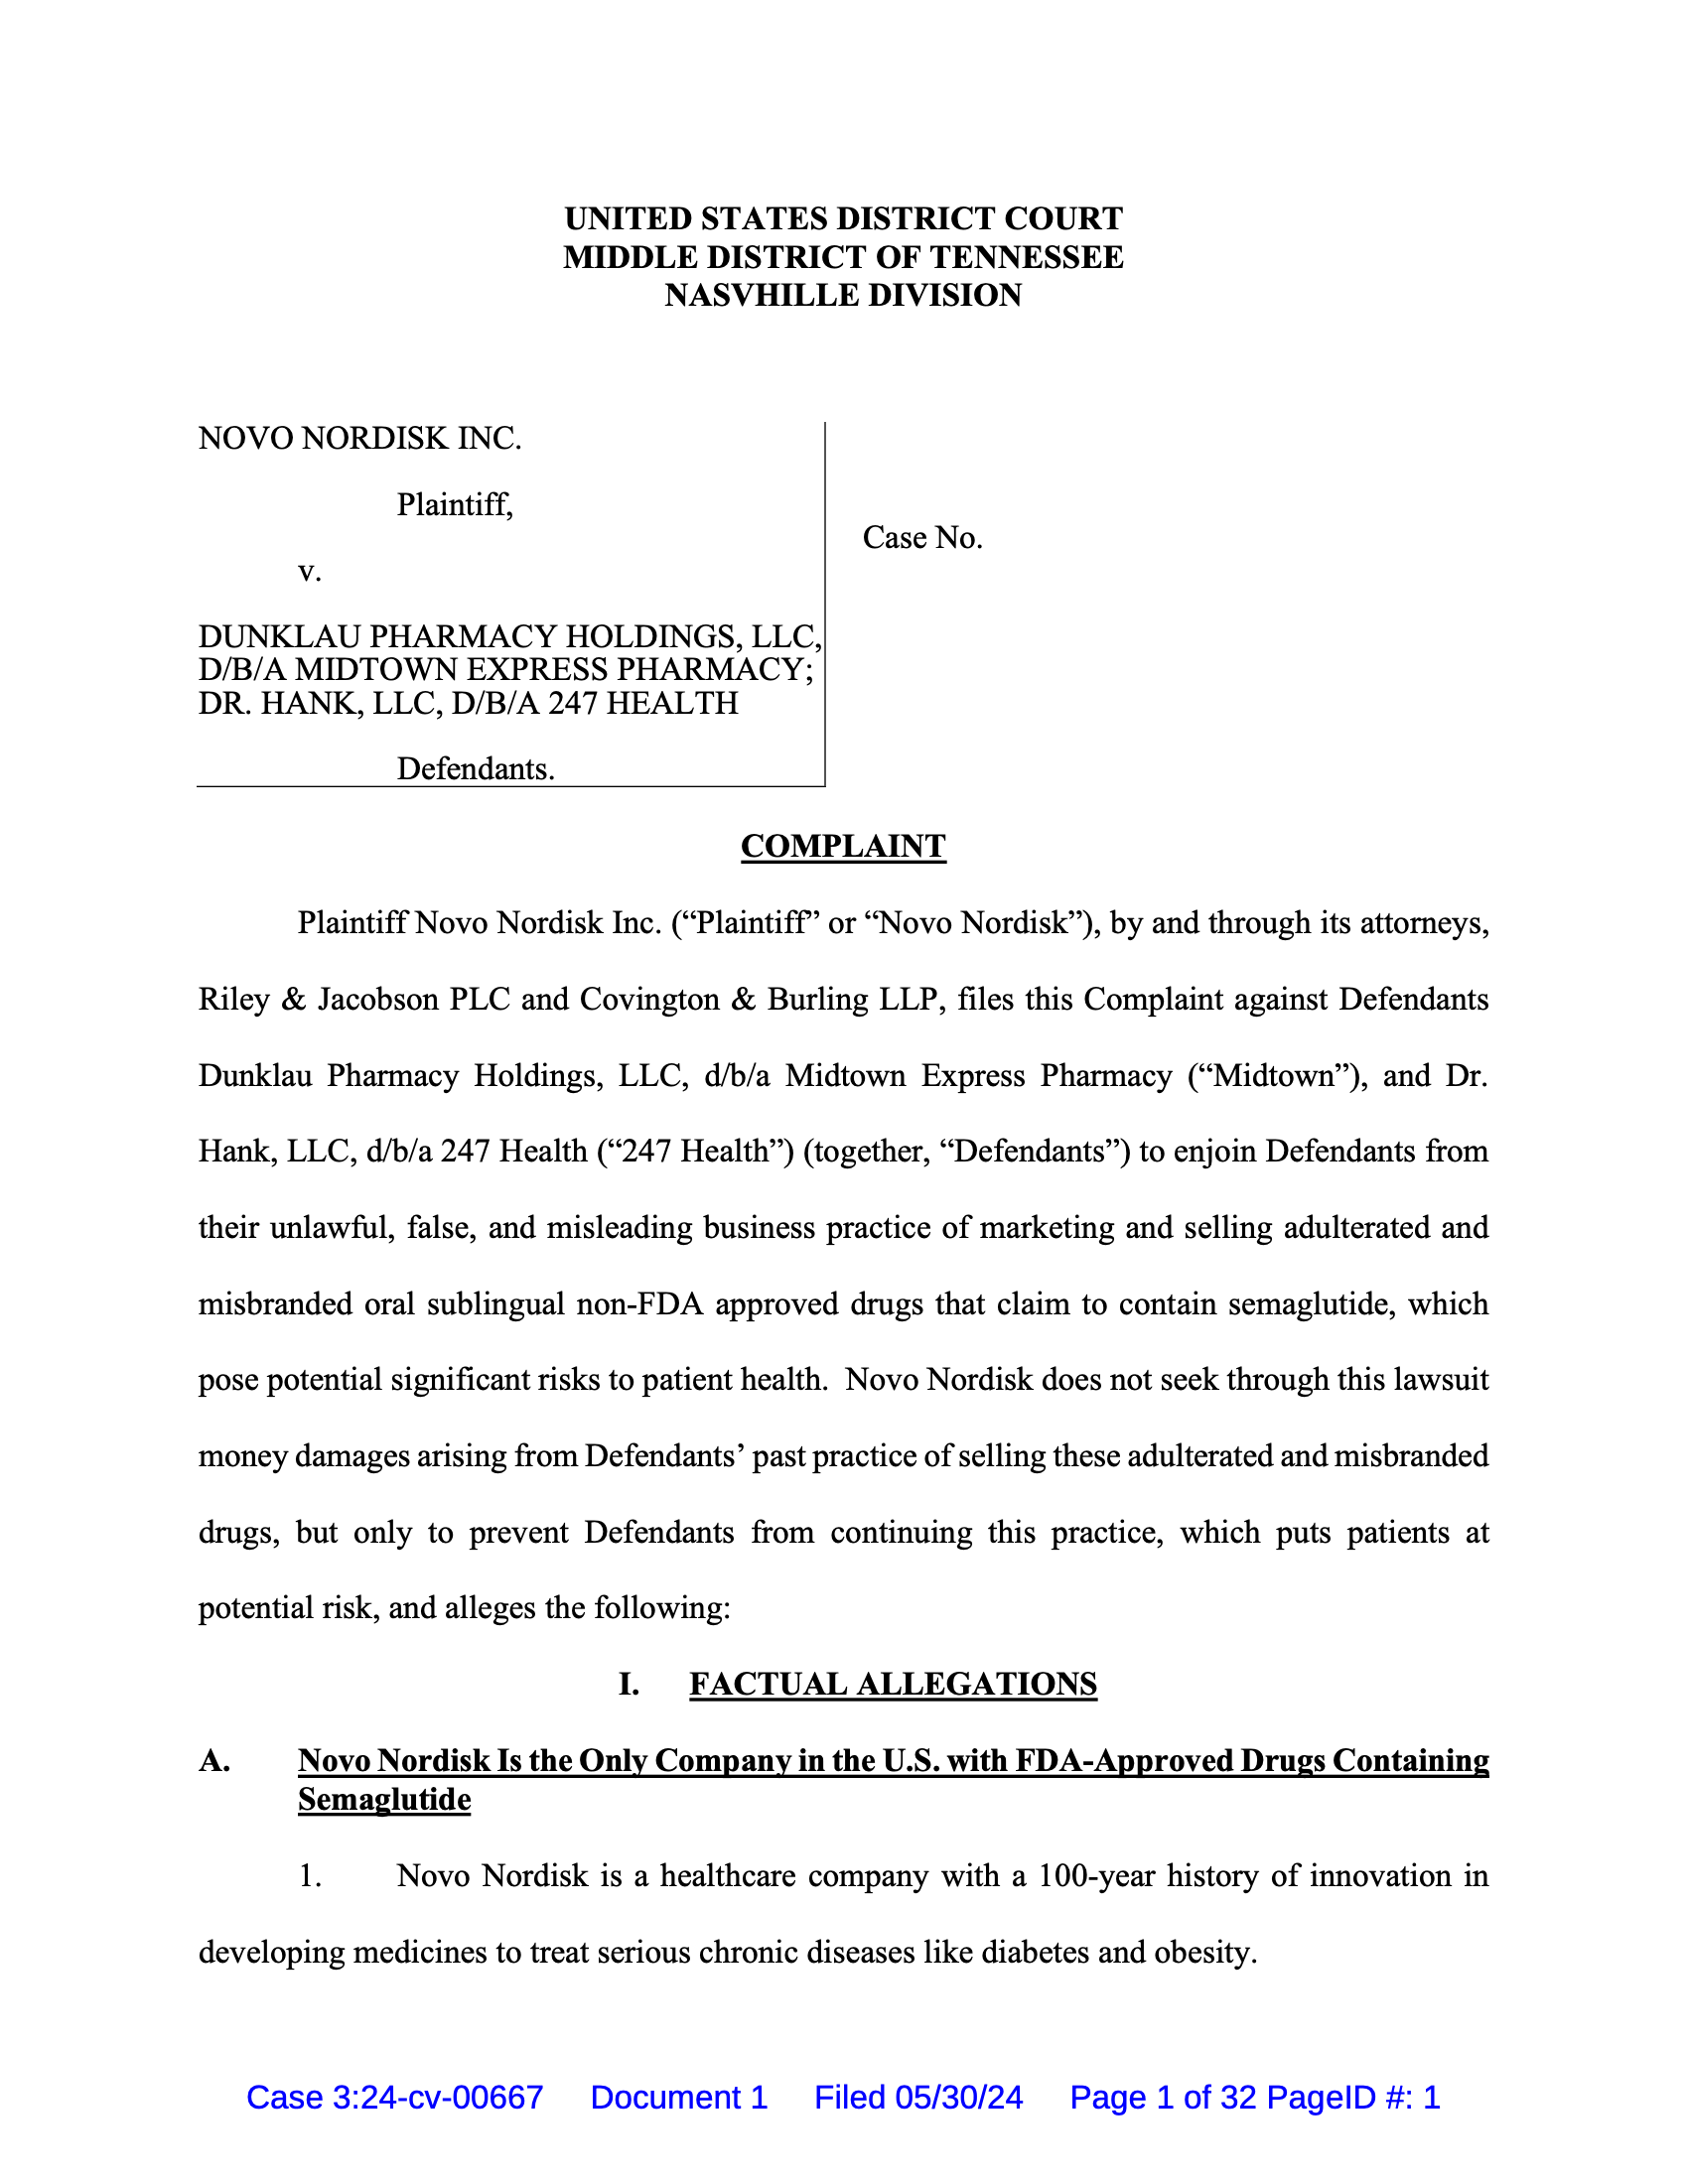 <a href="https://www.safemedicines.org/wp-content/uploads/2019/09/Novo-Nordisk-v-MidtownExpress-Complaint.pdf">Novo Nordisk v Midtown Express Pharmacy</a><br>Filed in Tennessee, May 30, 2024